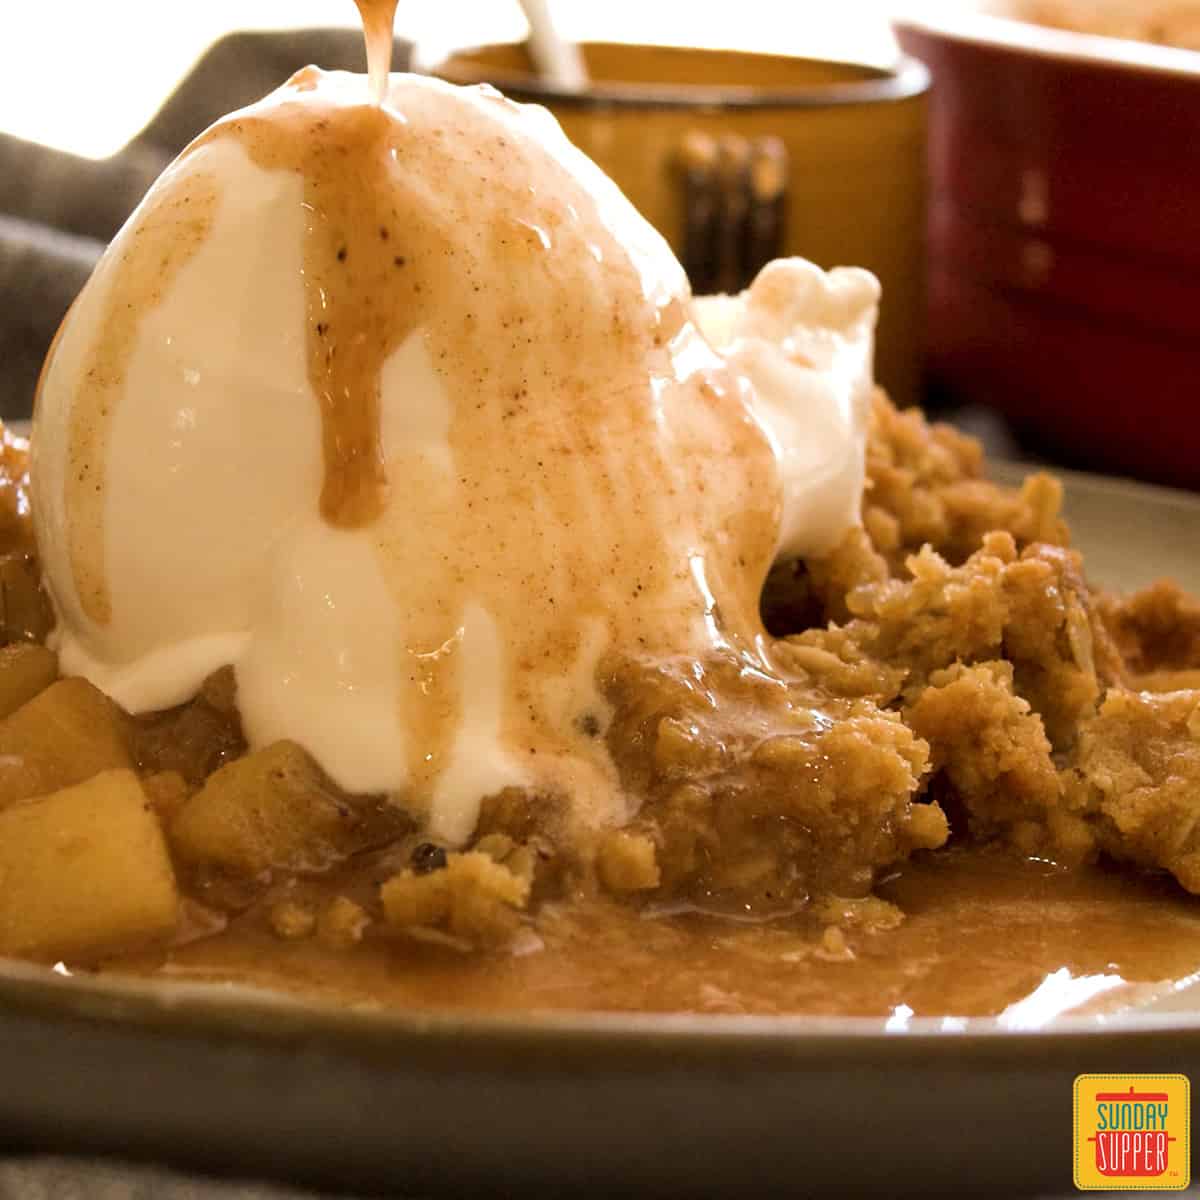 Ice cream melting over the top of a slice of apple crisp